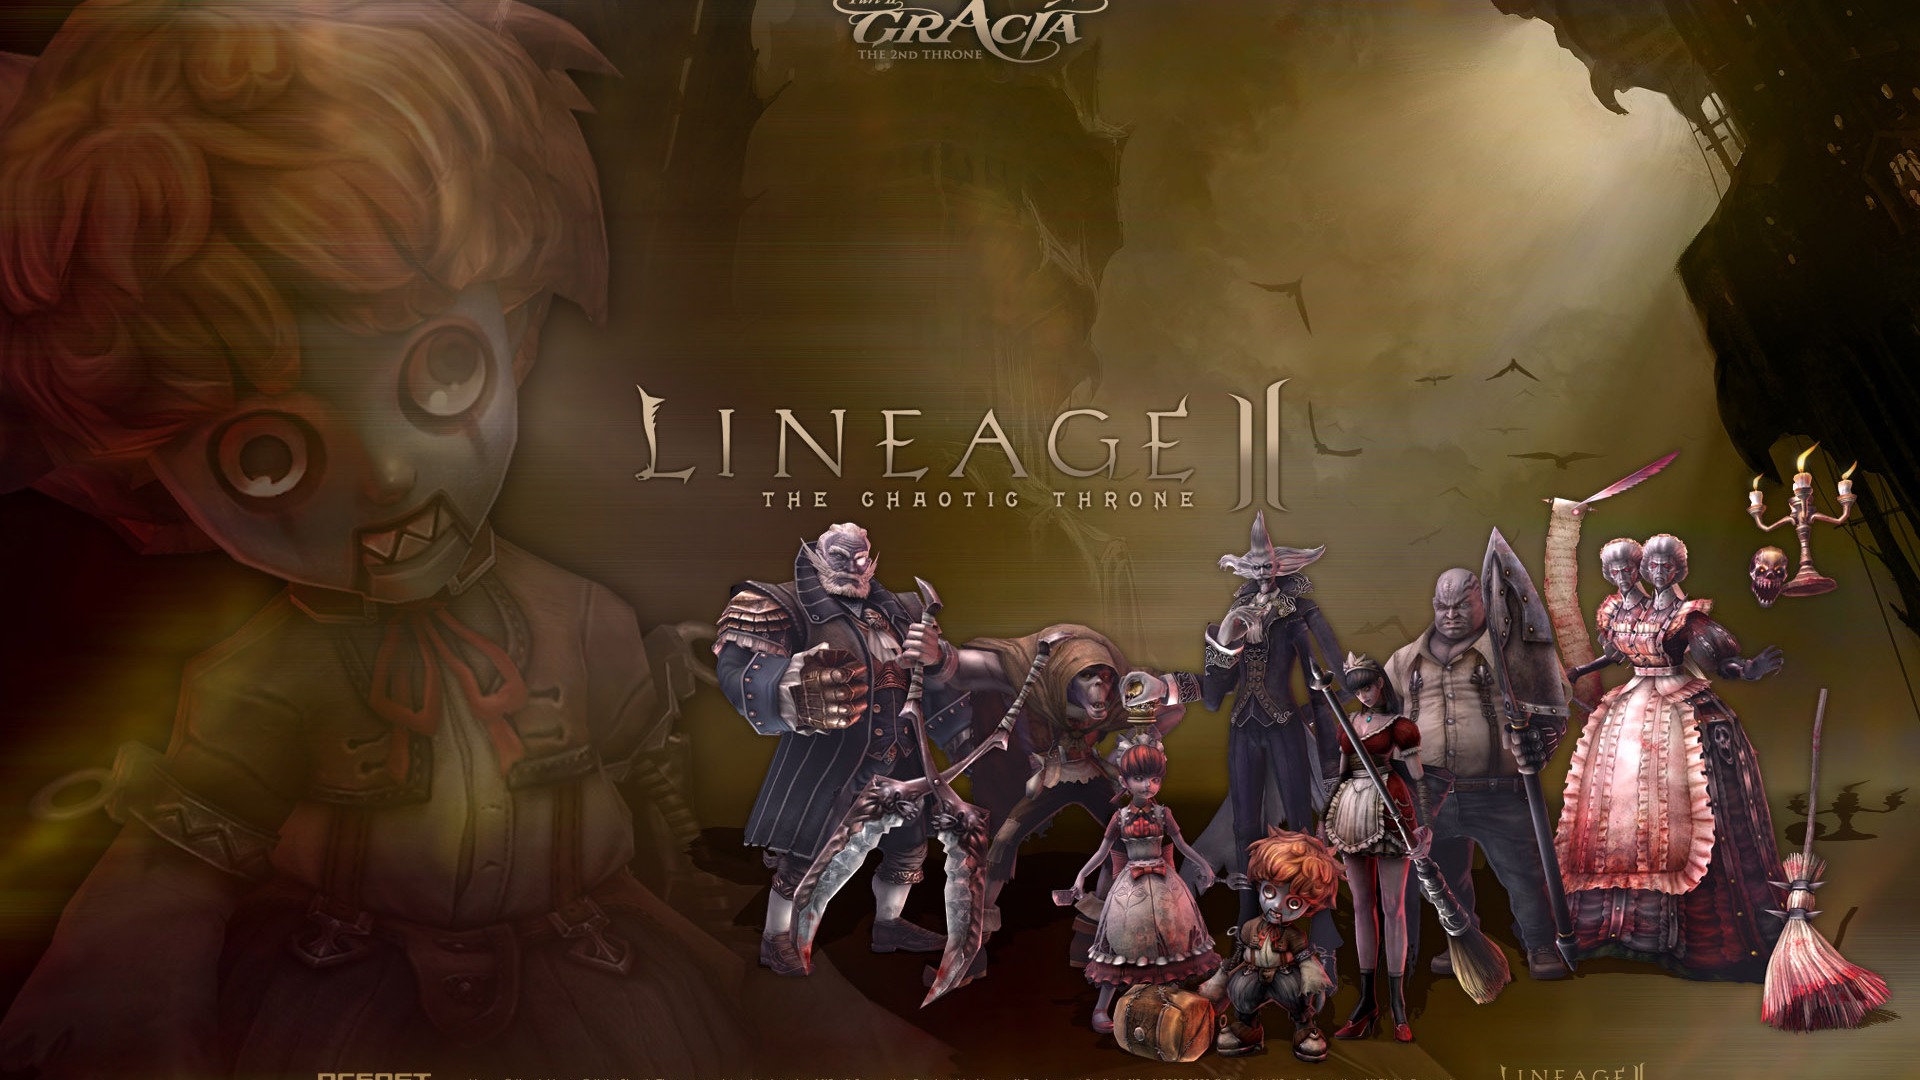 LINEAGE Ⅱ Modellierung HD-Gaming-Wallpaper #20 - 1920x1080